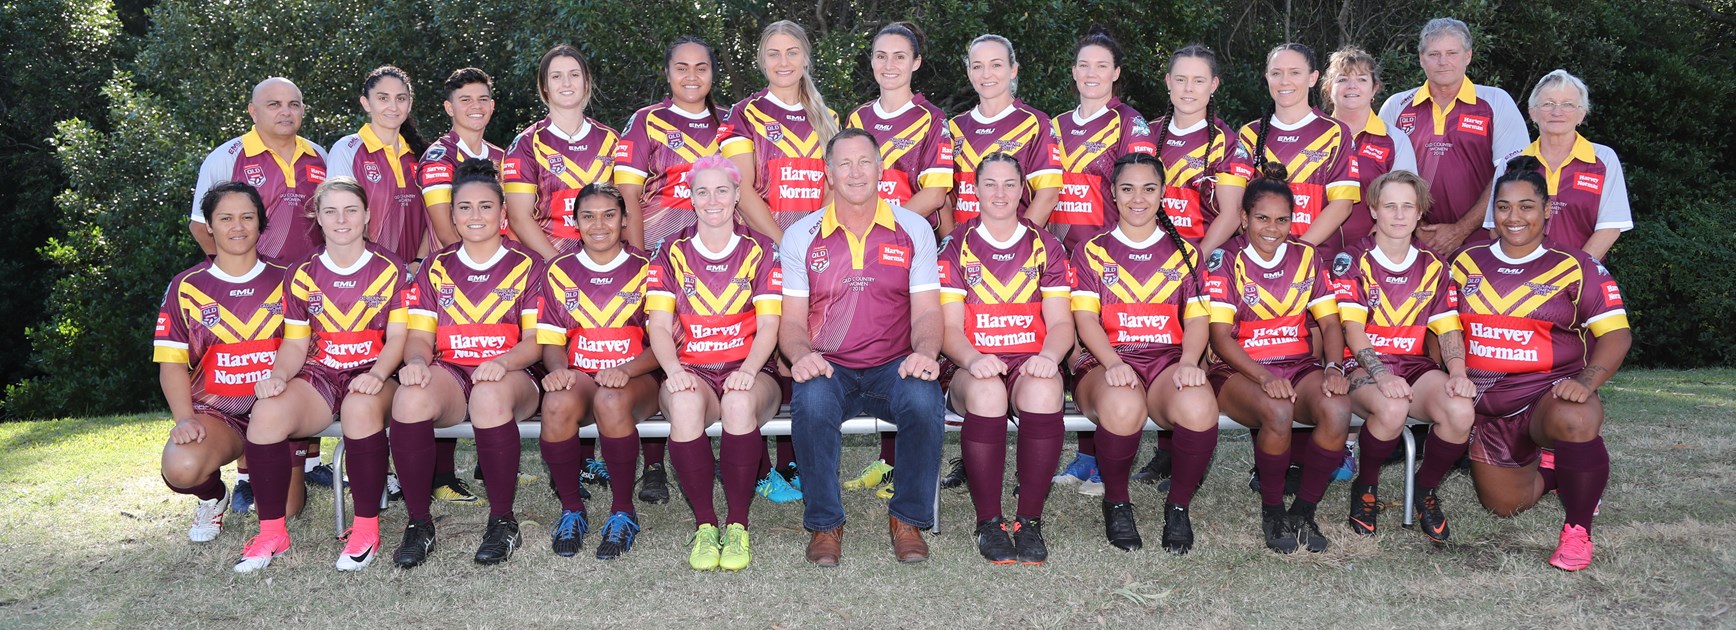 Queensland Country Women's staff announced